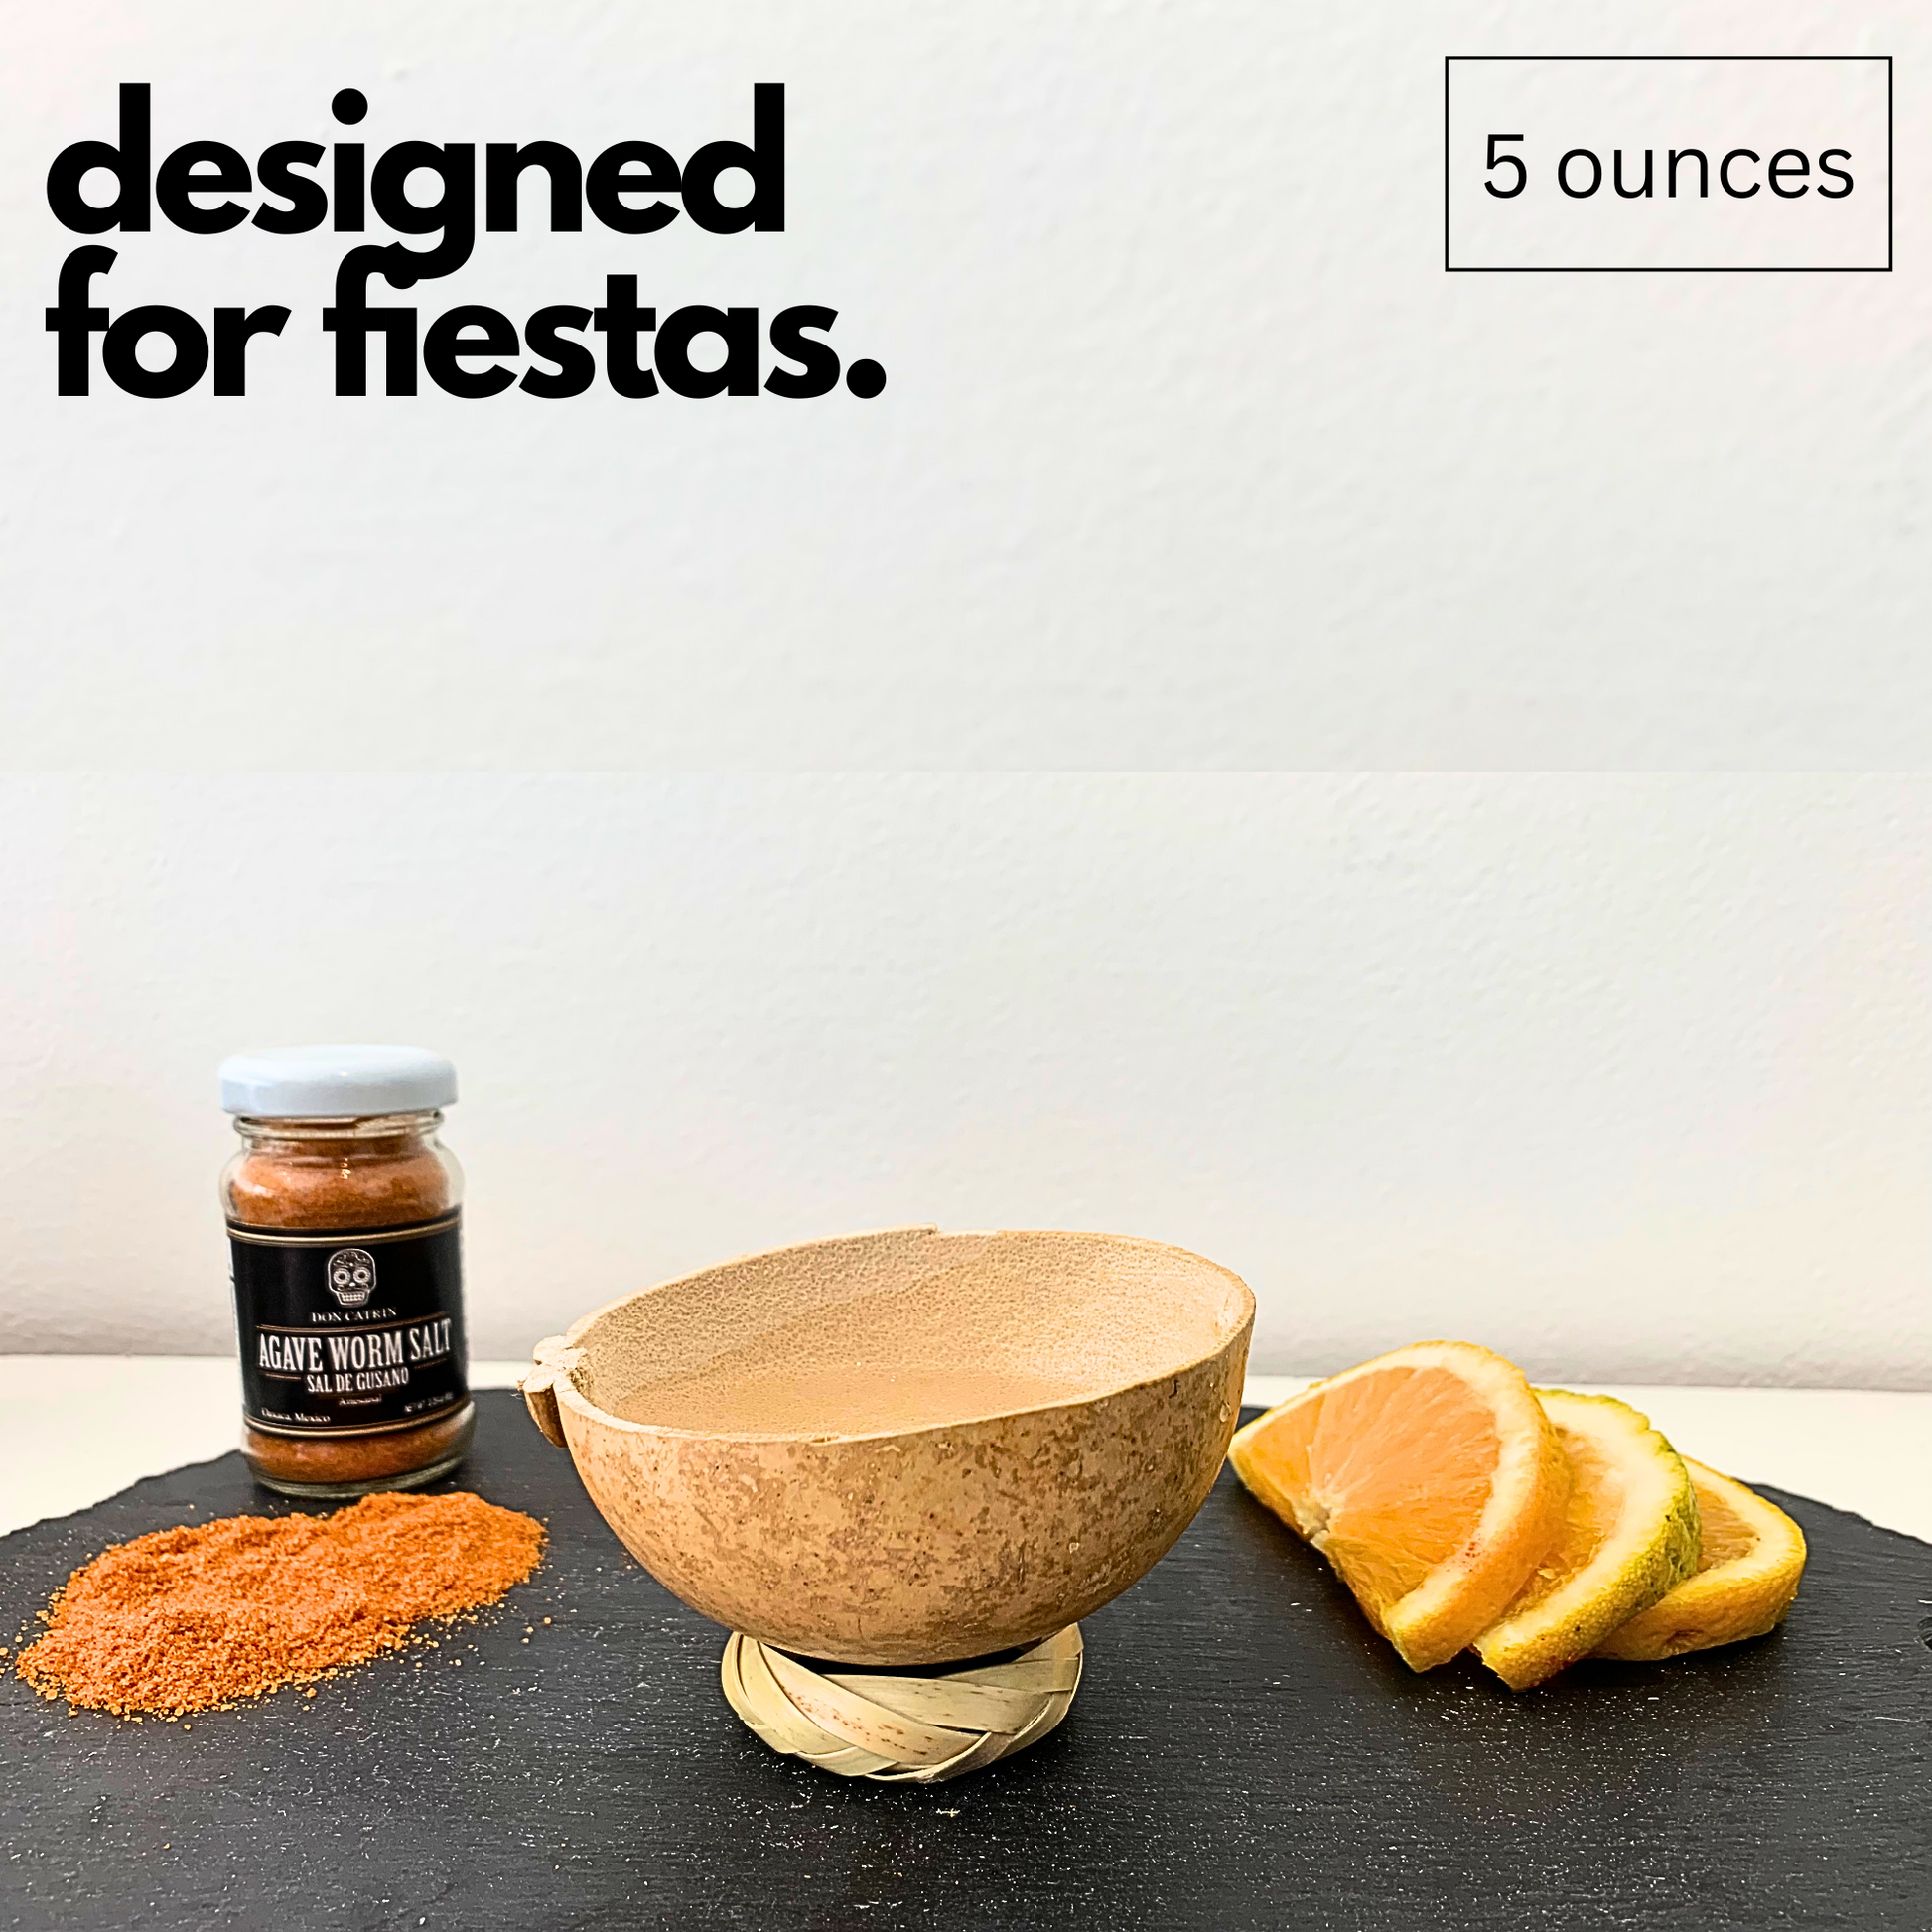 Handmade 5oz Mezcal Jicaras Cups from Mexico, perfect for enjoying agave spirits in a traditional manner, supporting sustainability. Set with worm salt and mezcal